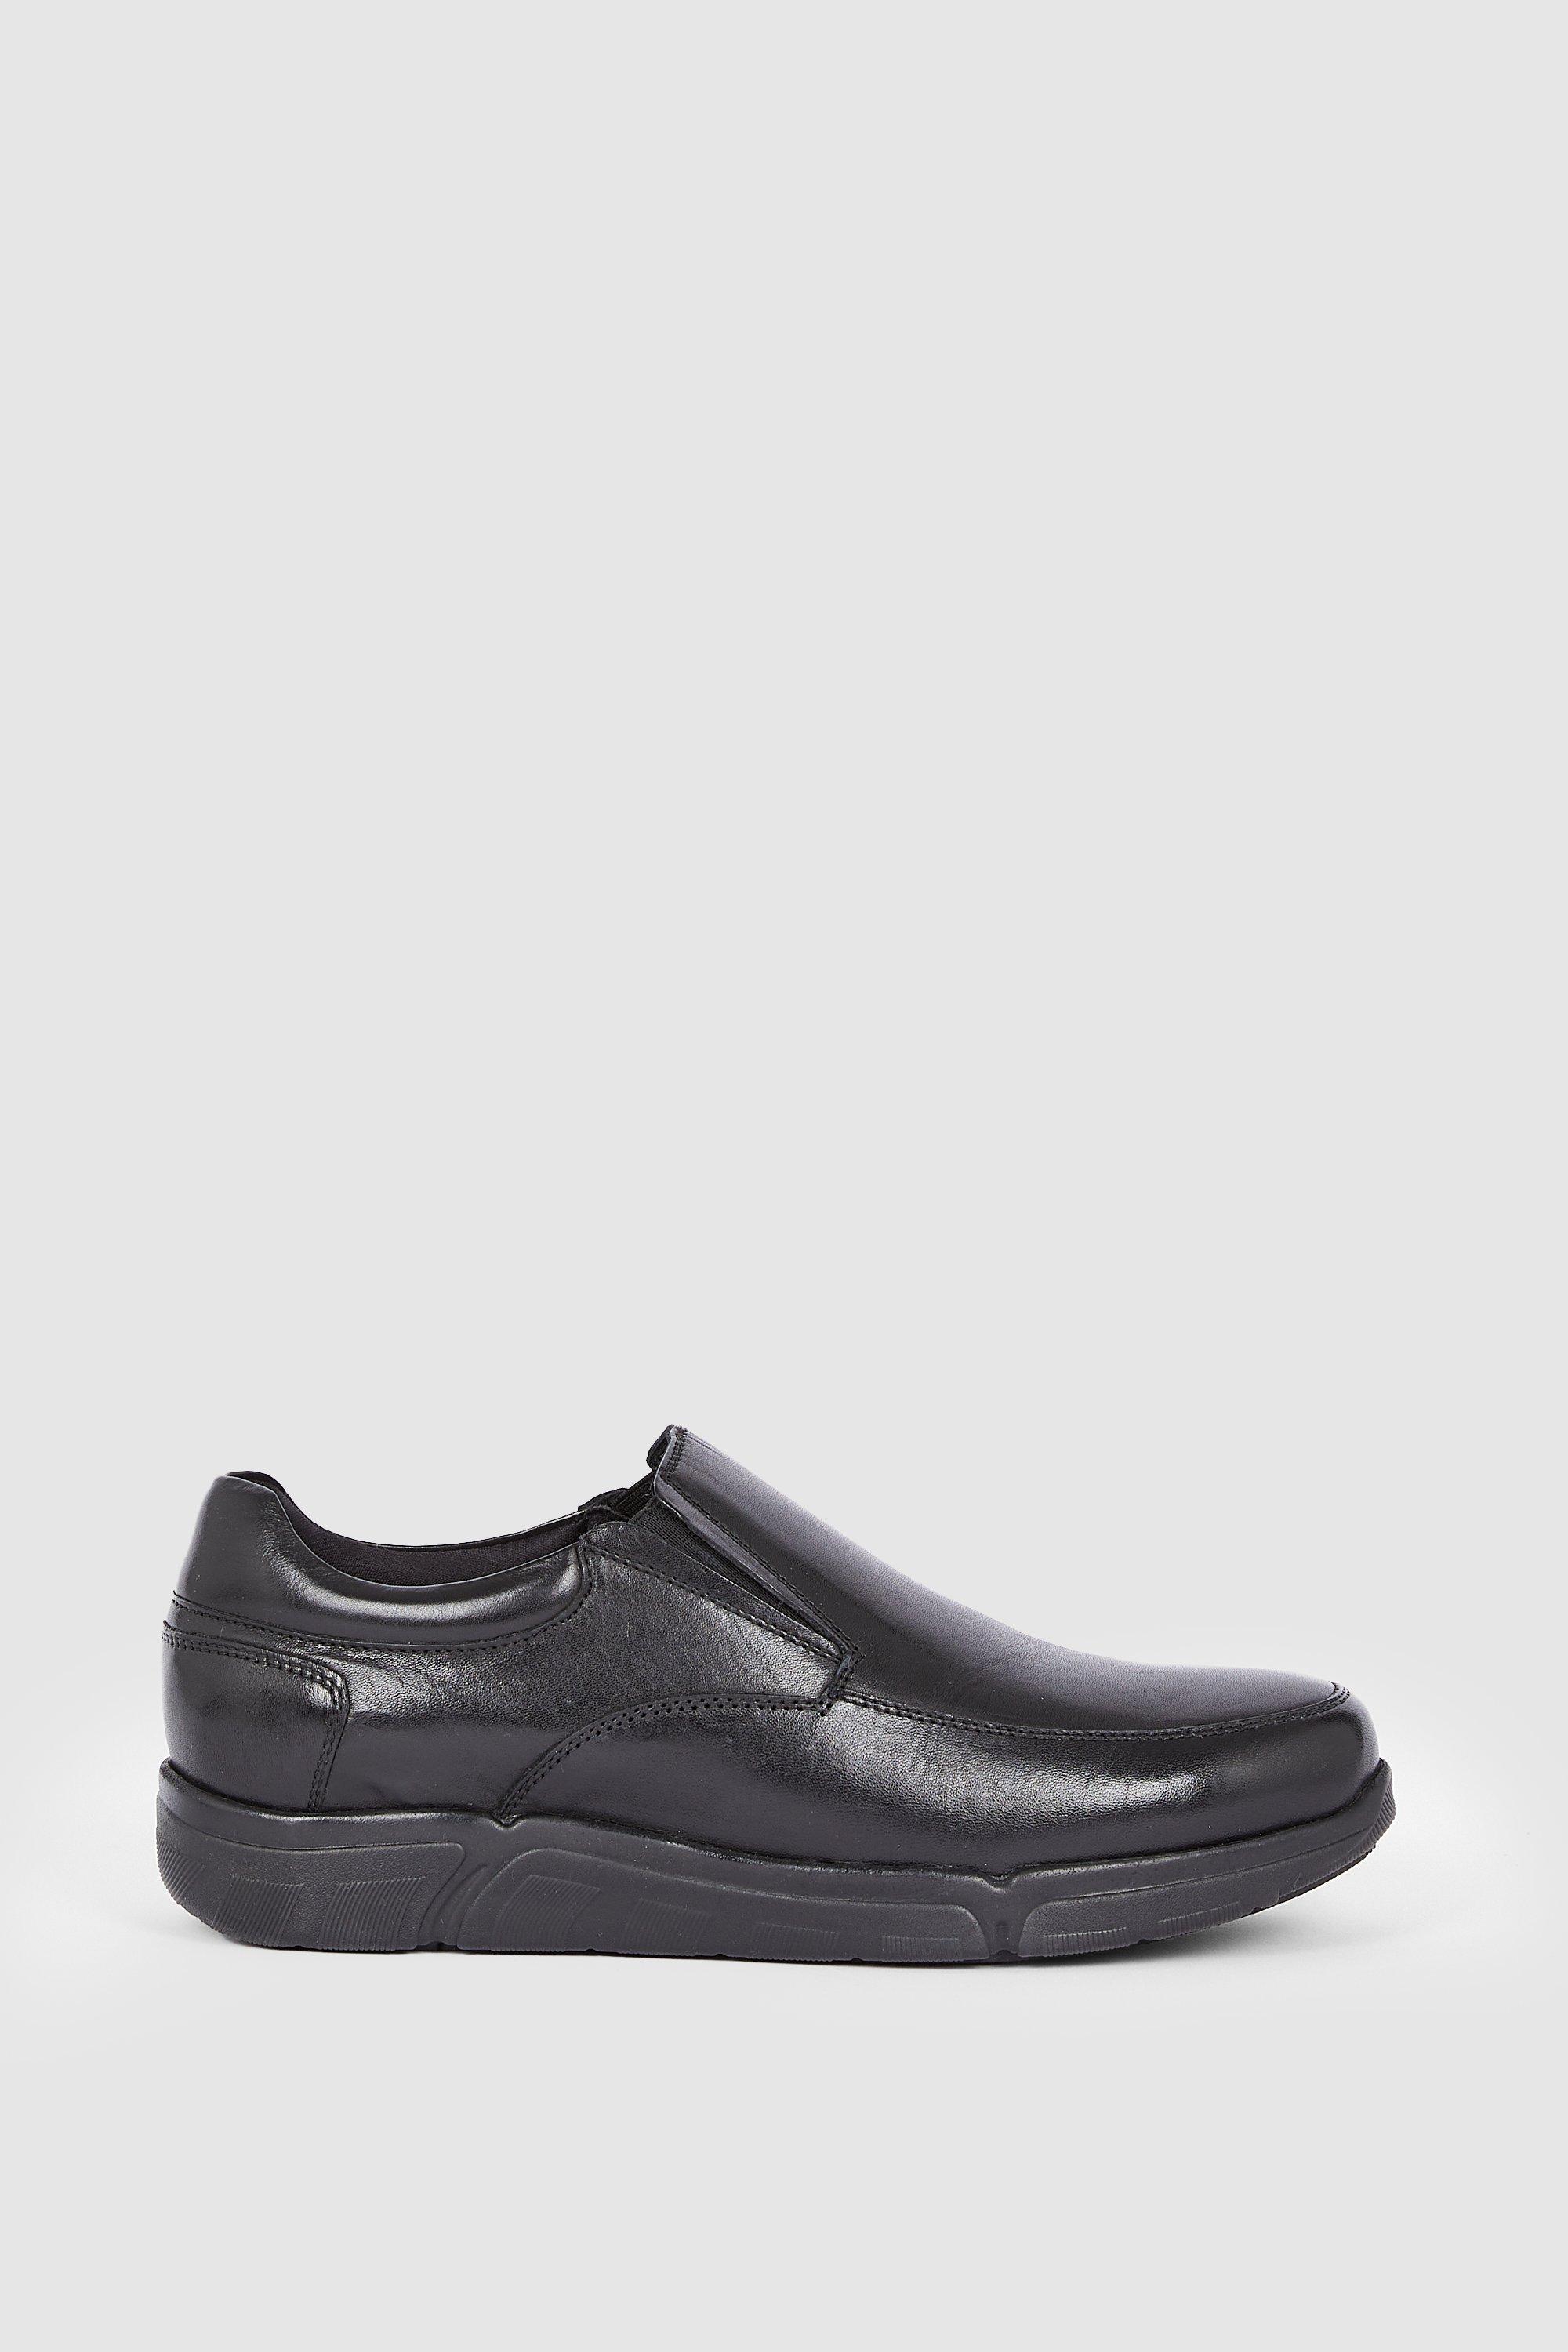 Shoes | Airsoft Ross Wide Fit Leather Slip on Shoe | Debenhams